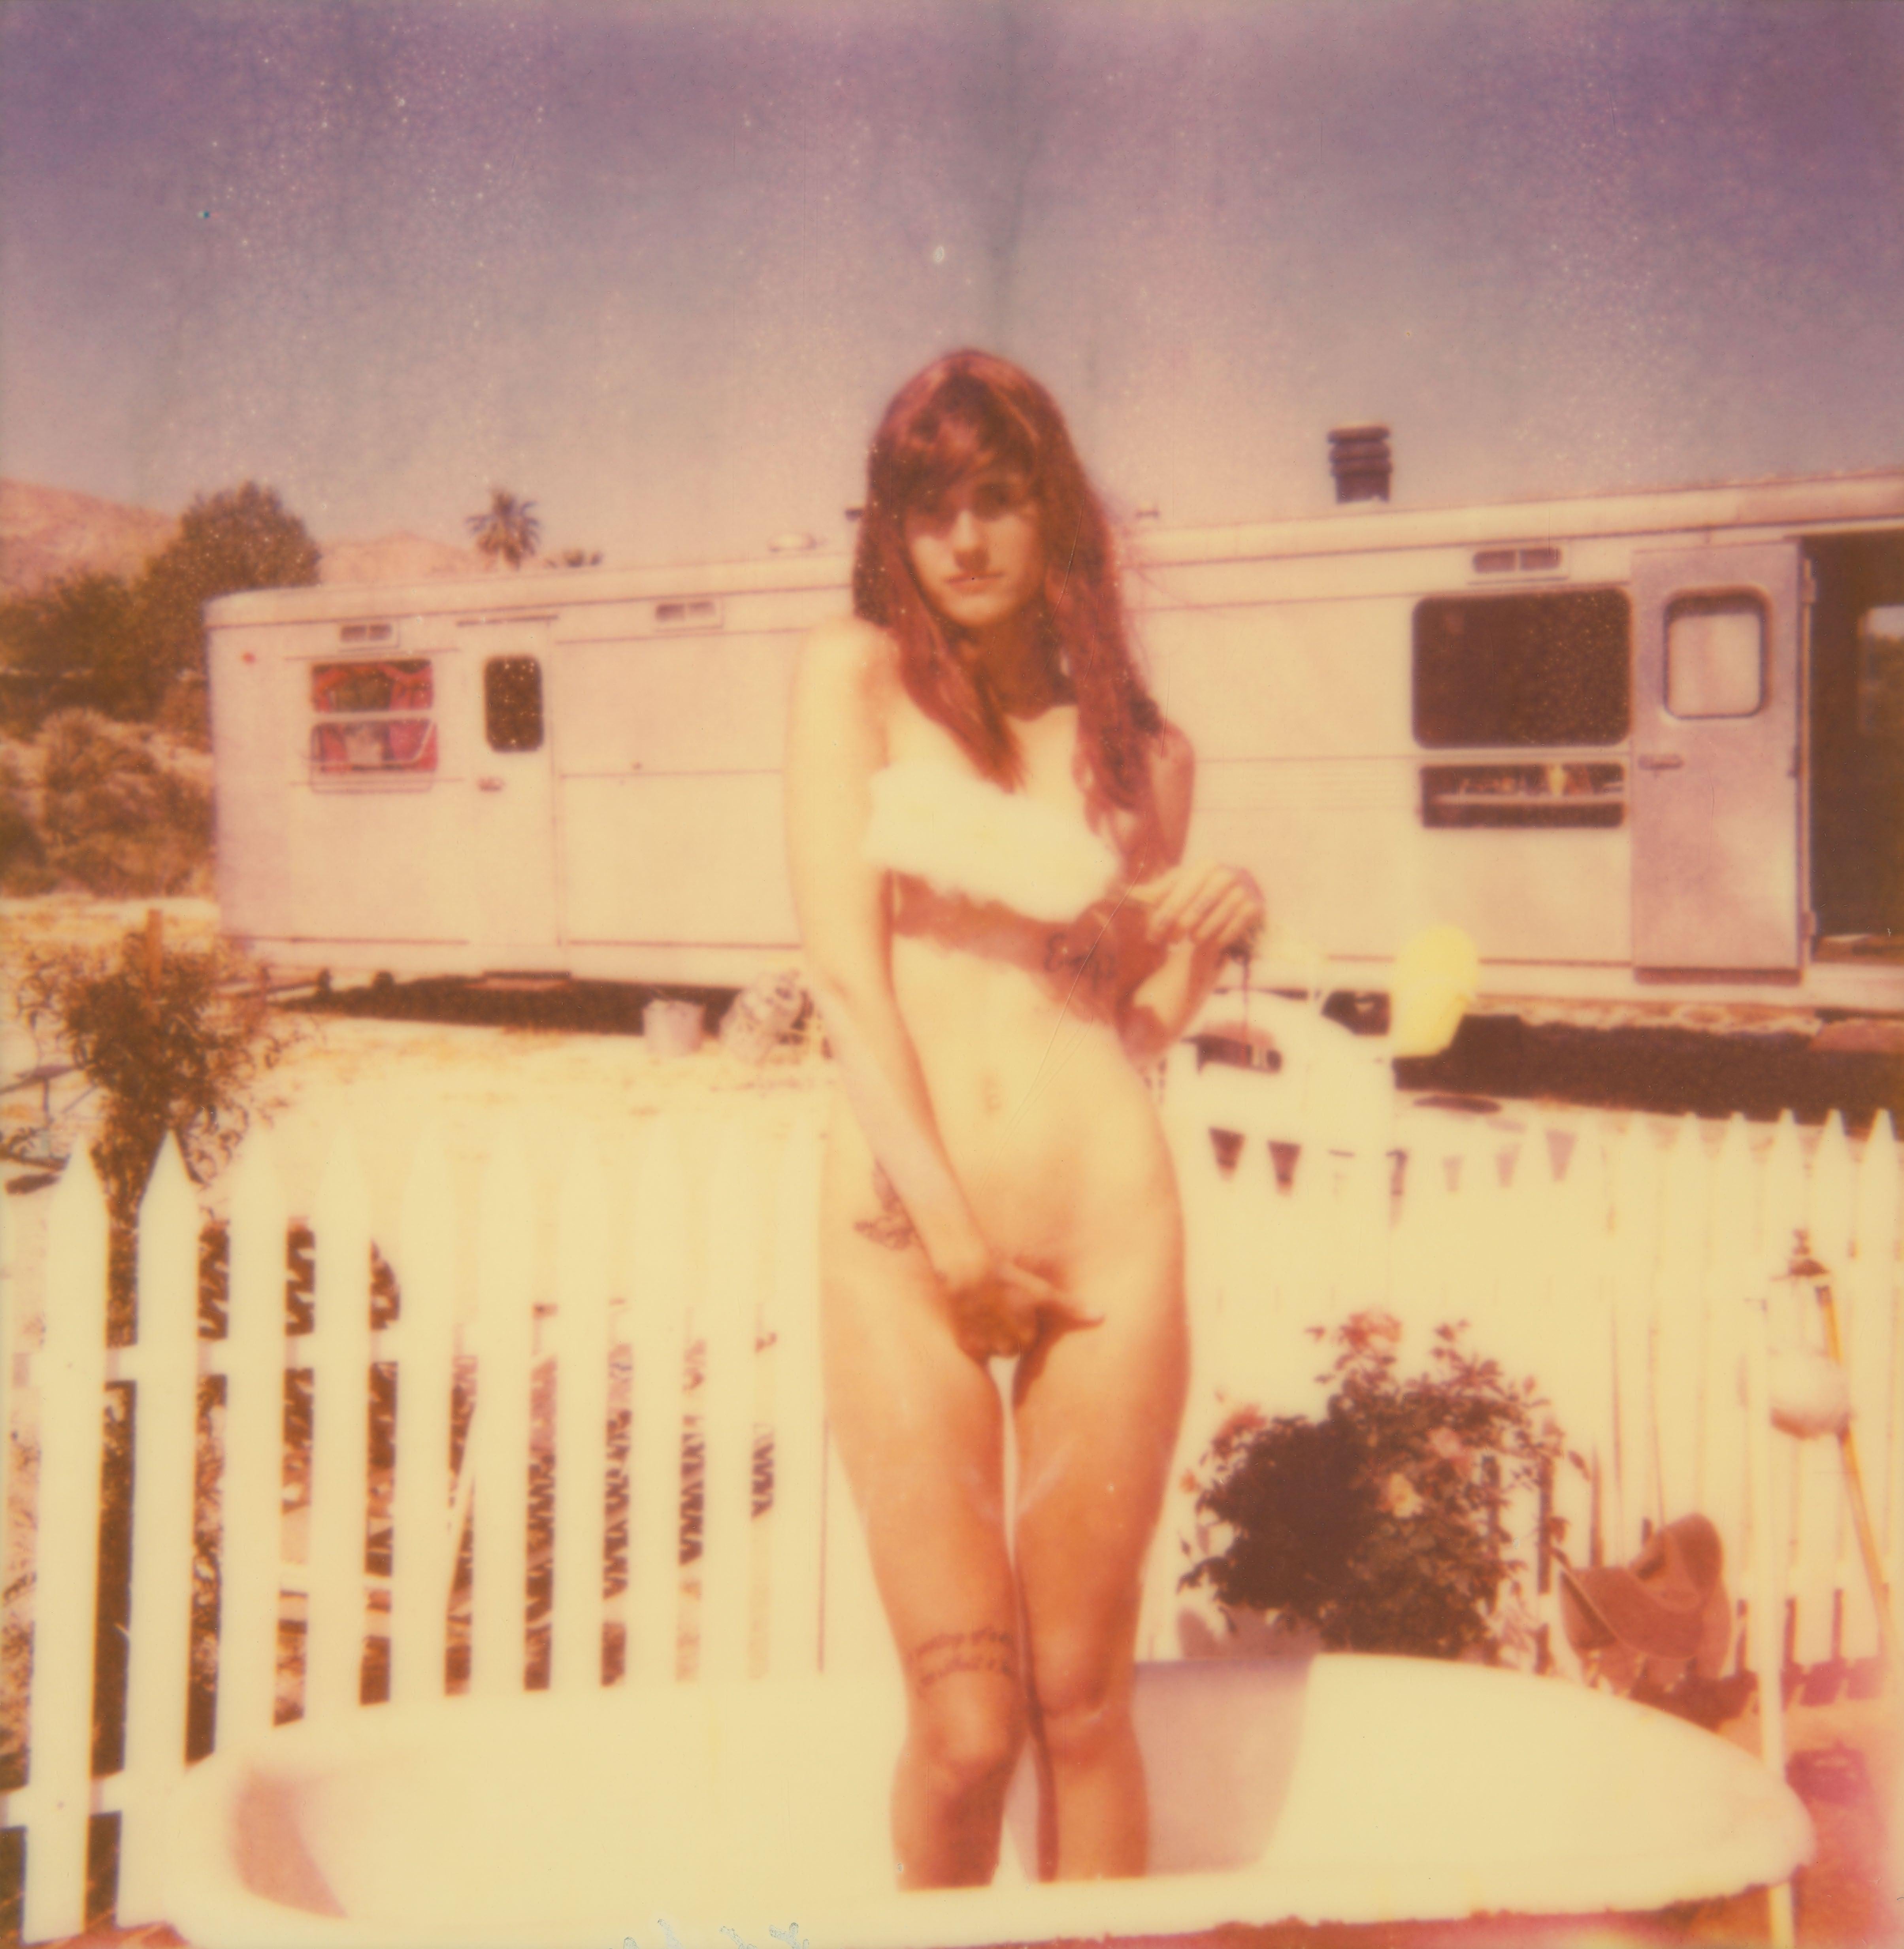 Stefanie Schneider Nude Photograph - The Girl II (Behind the White Picket Fence) - 38x36cm - based on a Polaroid